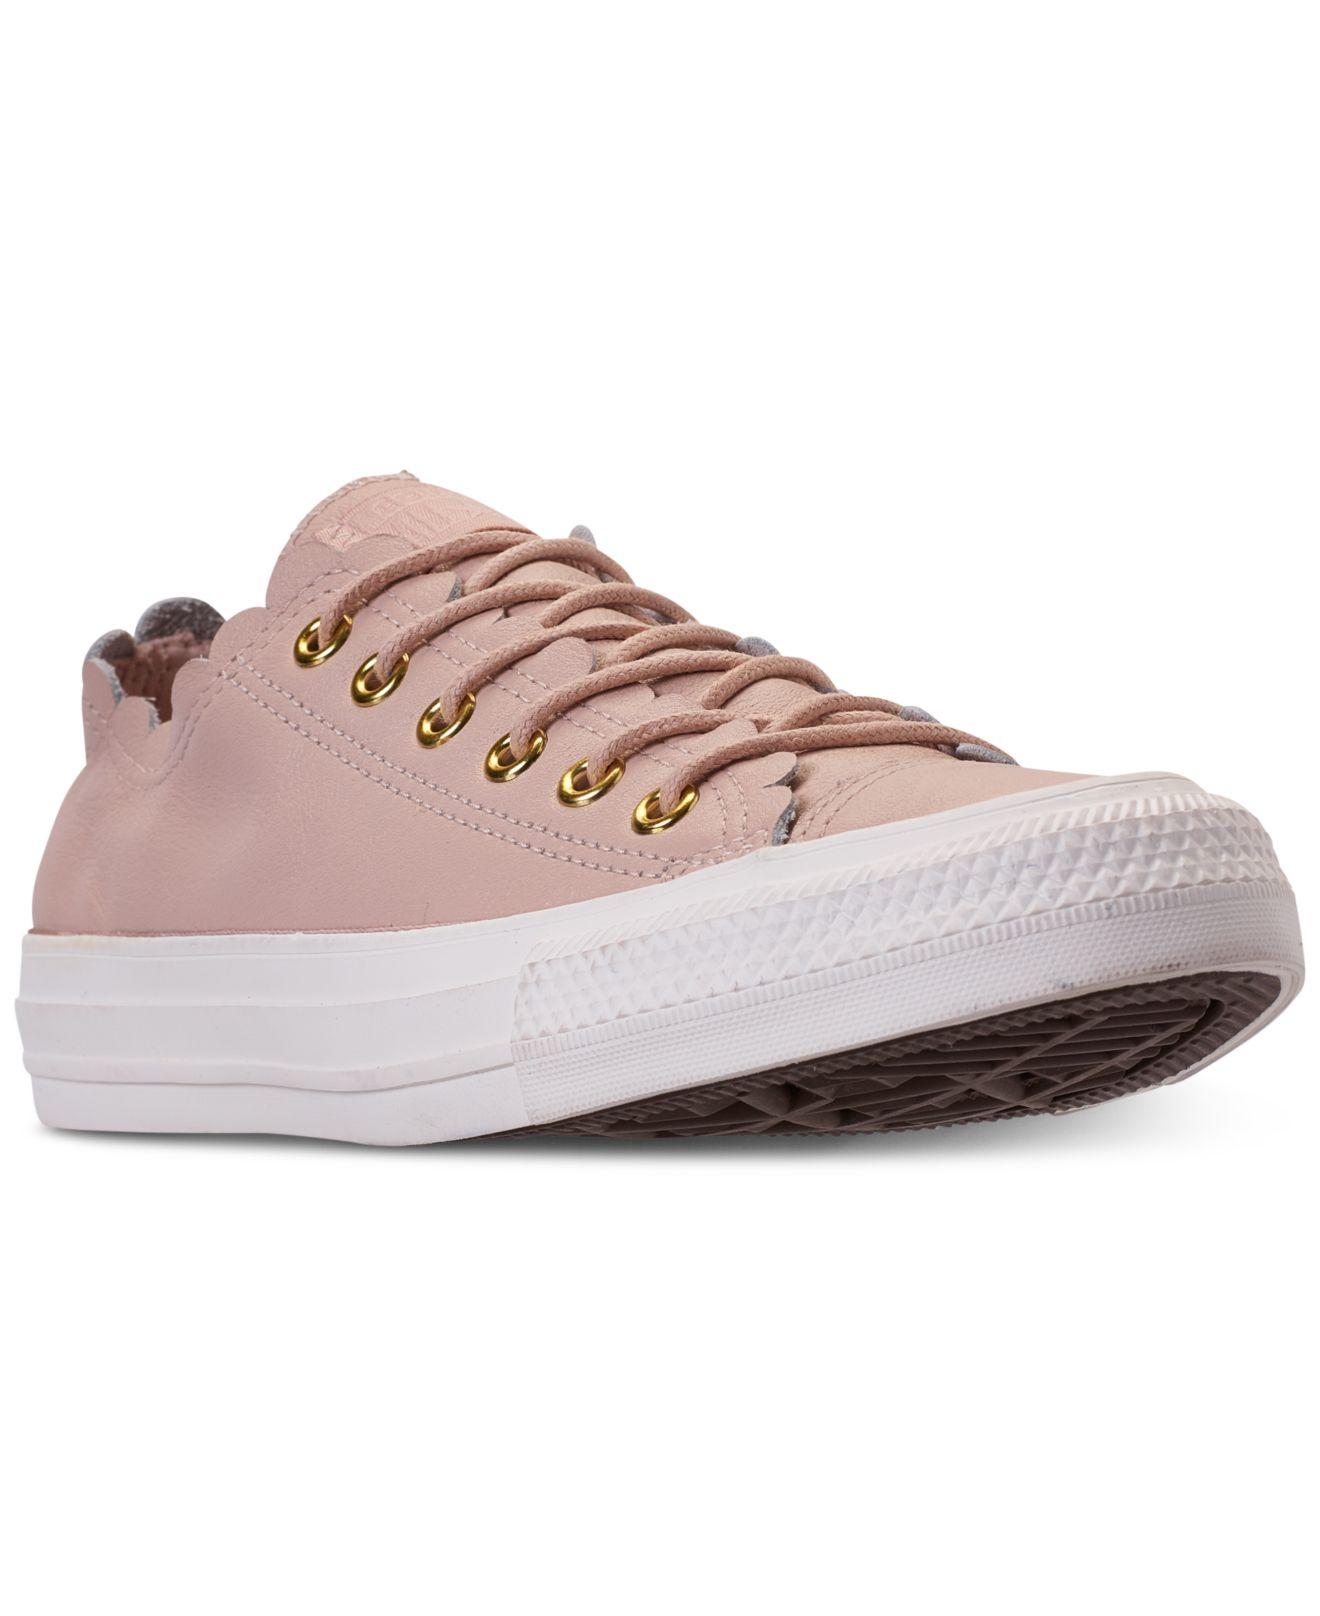 converse frilly thrills leather